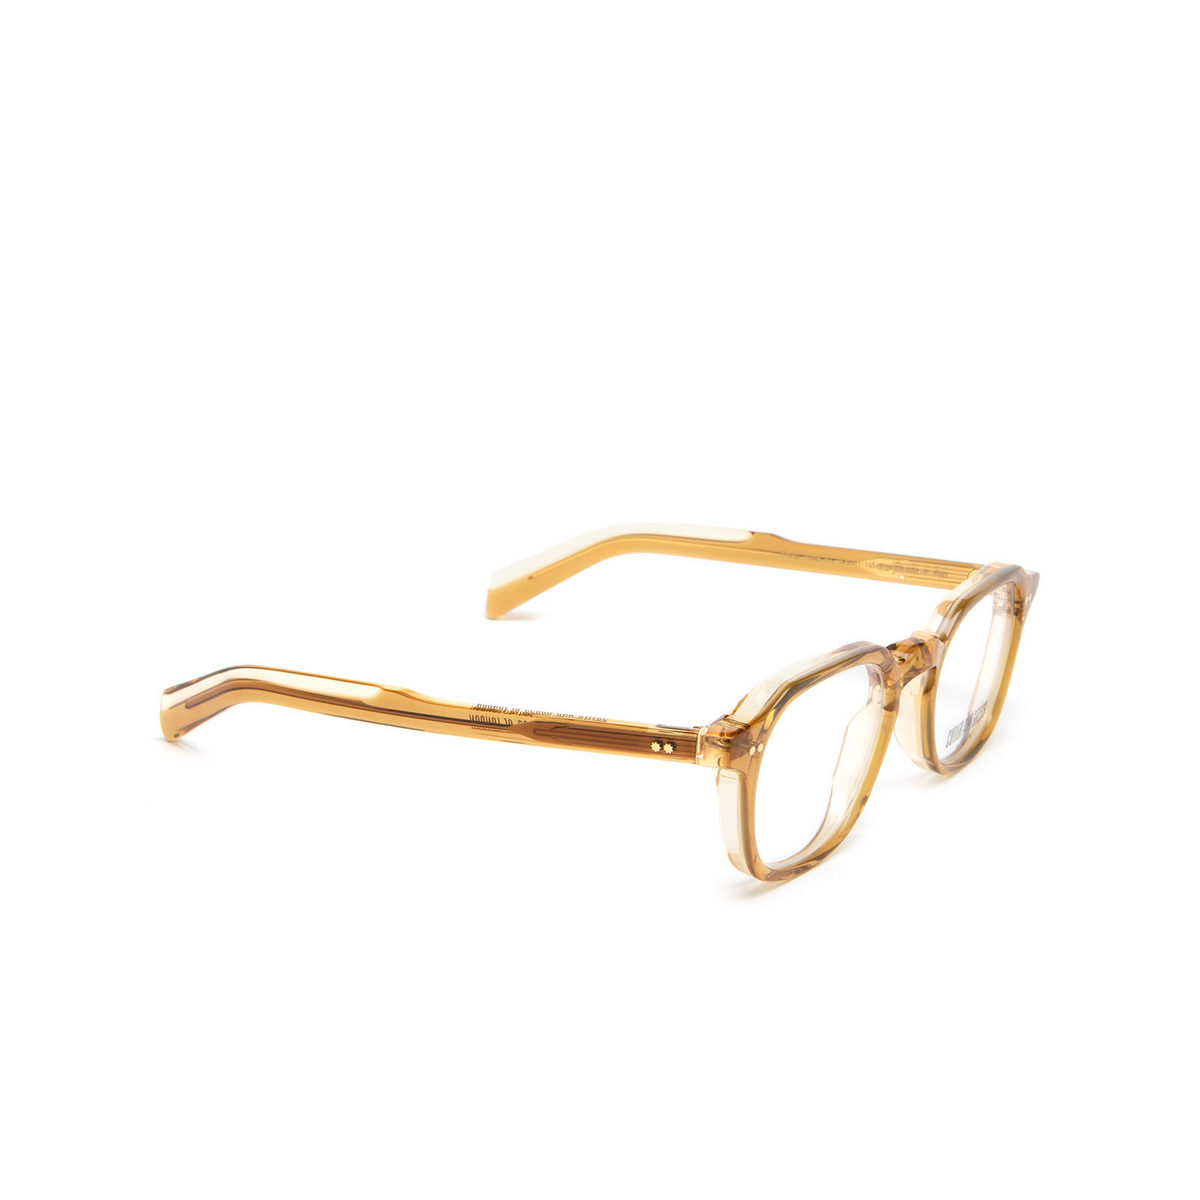 Cutler and Gross GR03 Eyeglasses 04 Multi Yellow - three-quarters view